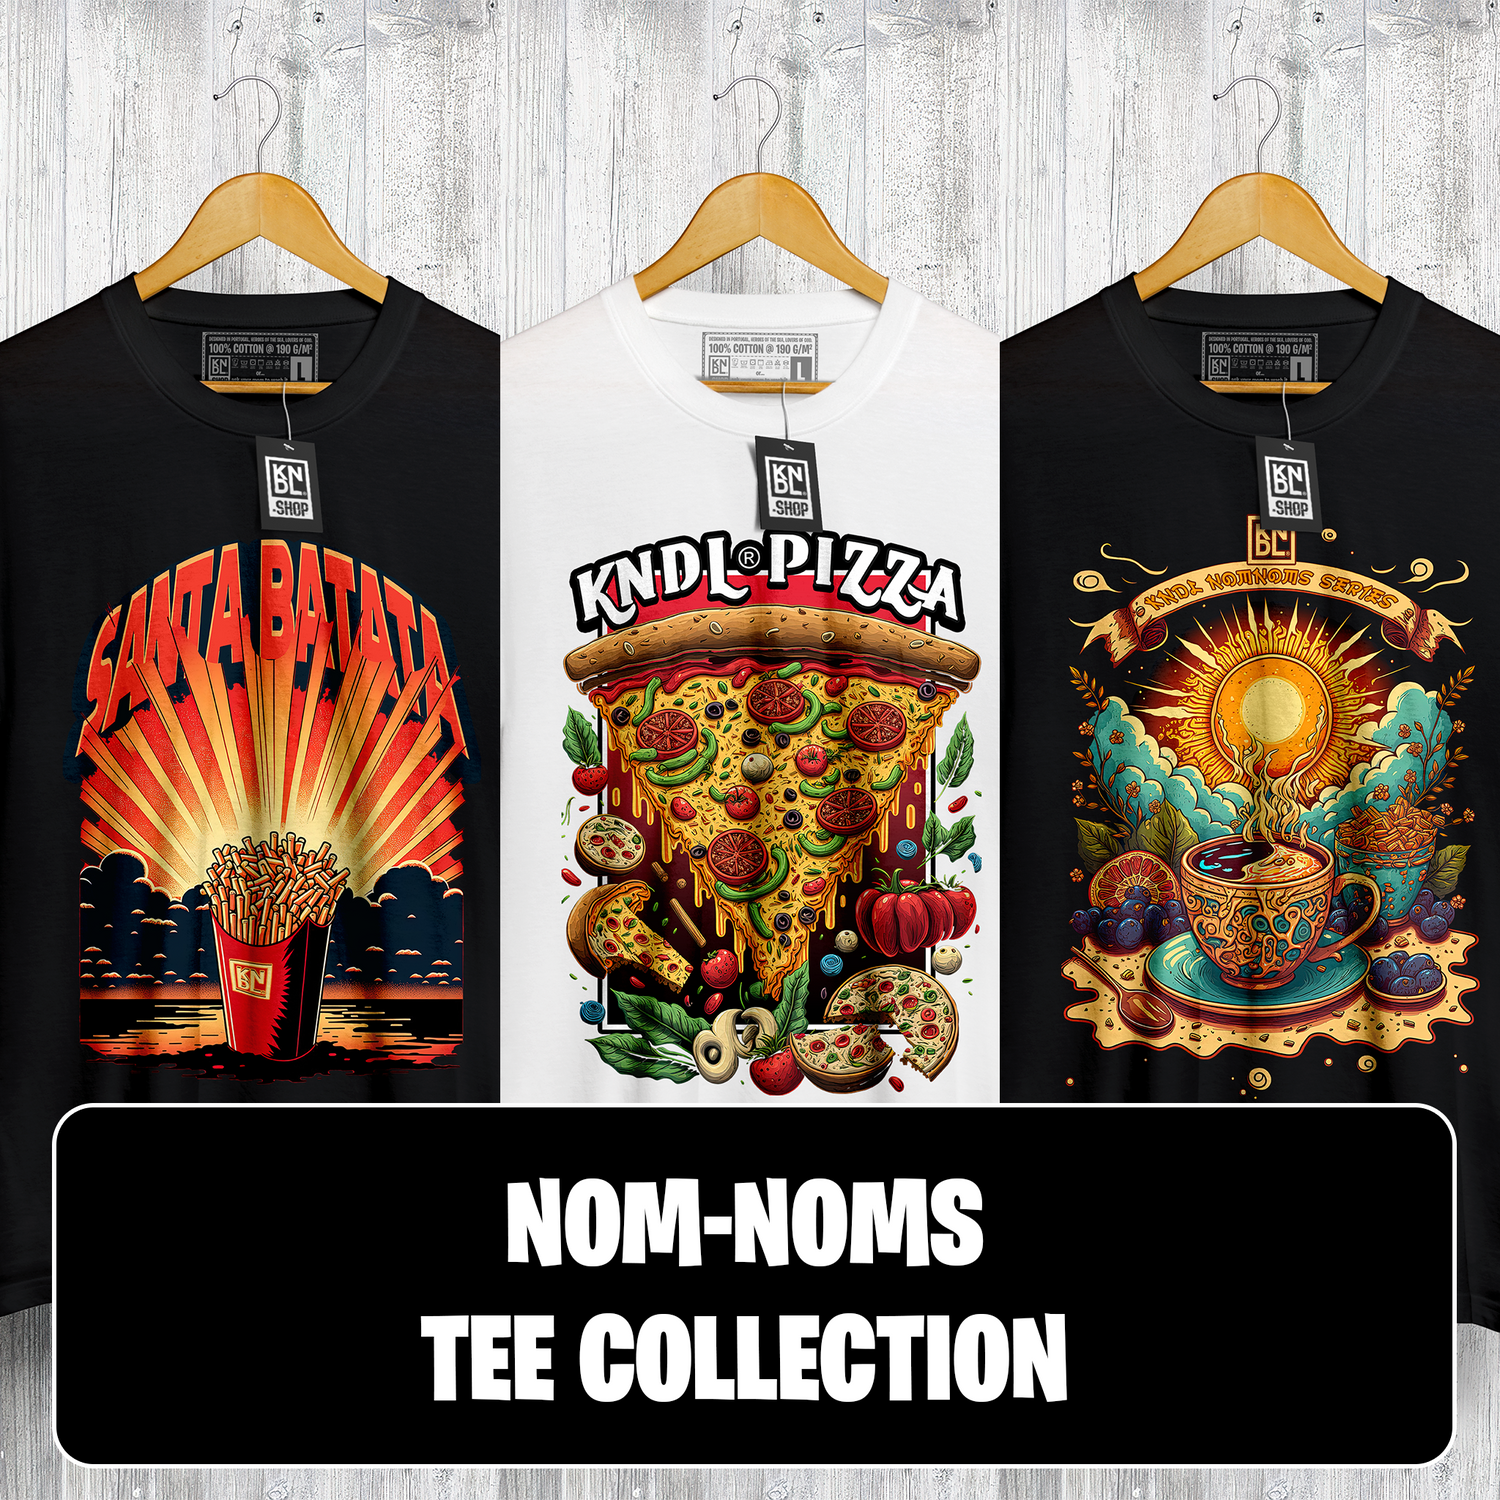 NOM-NOMS Tee Collection by KNDL®